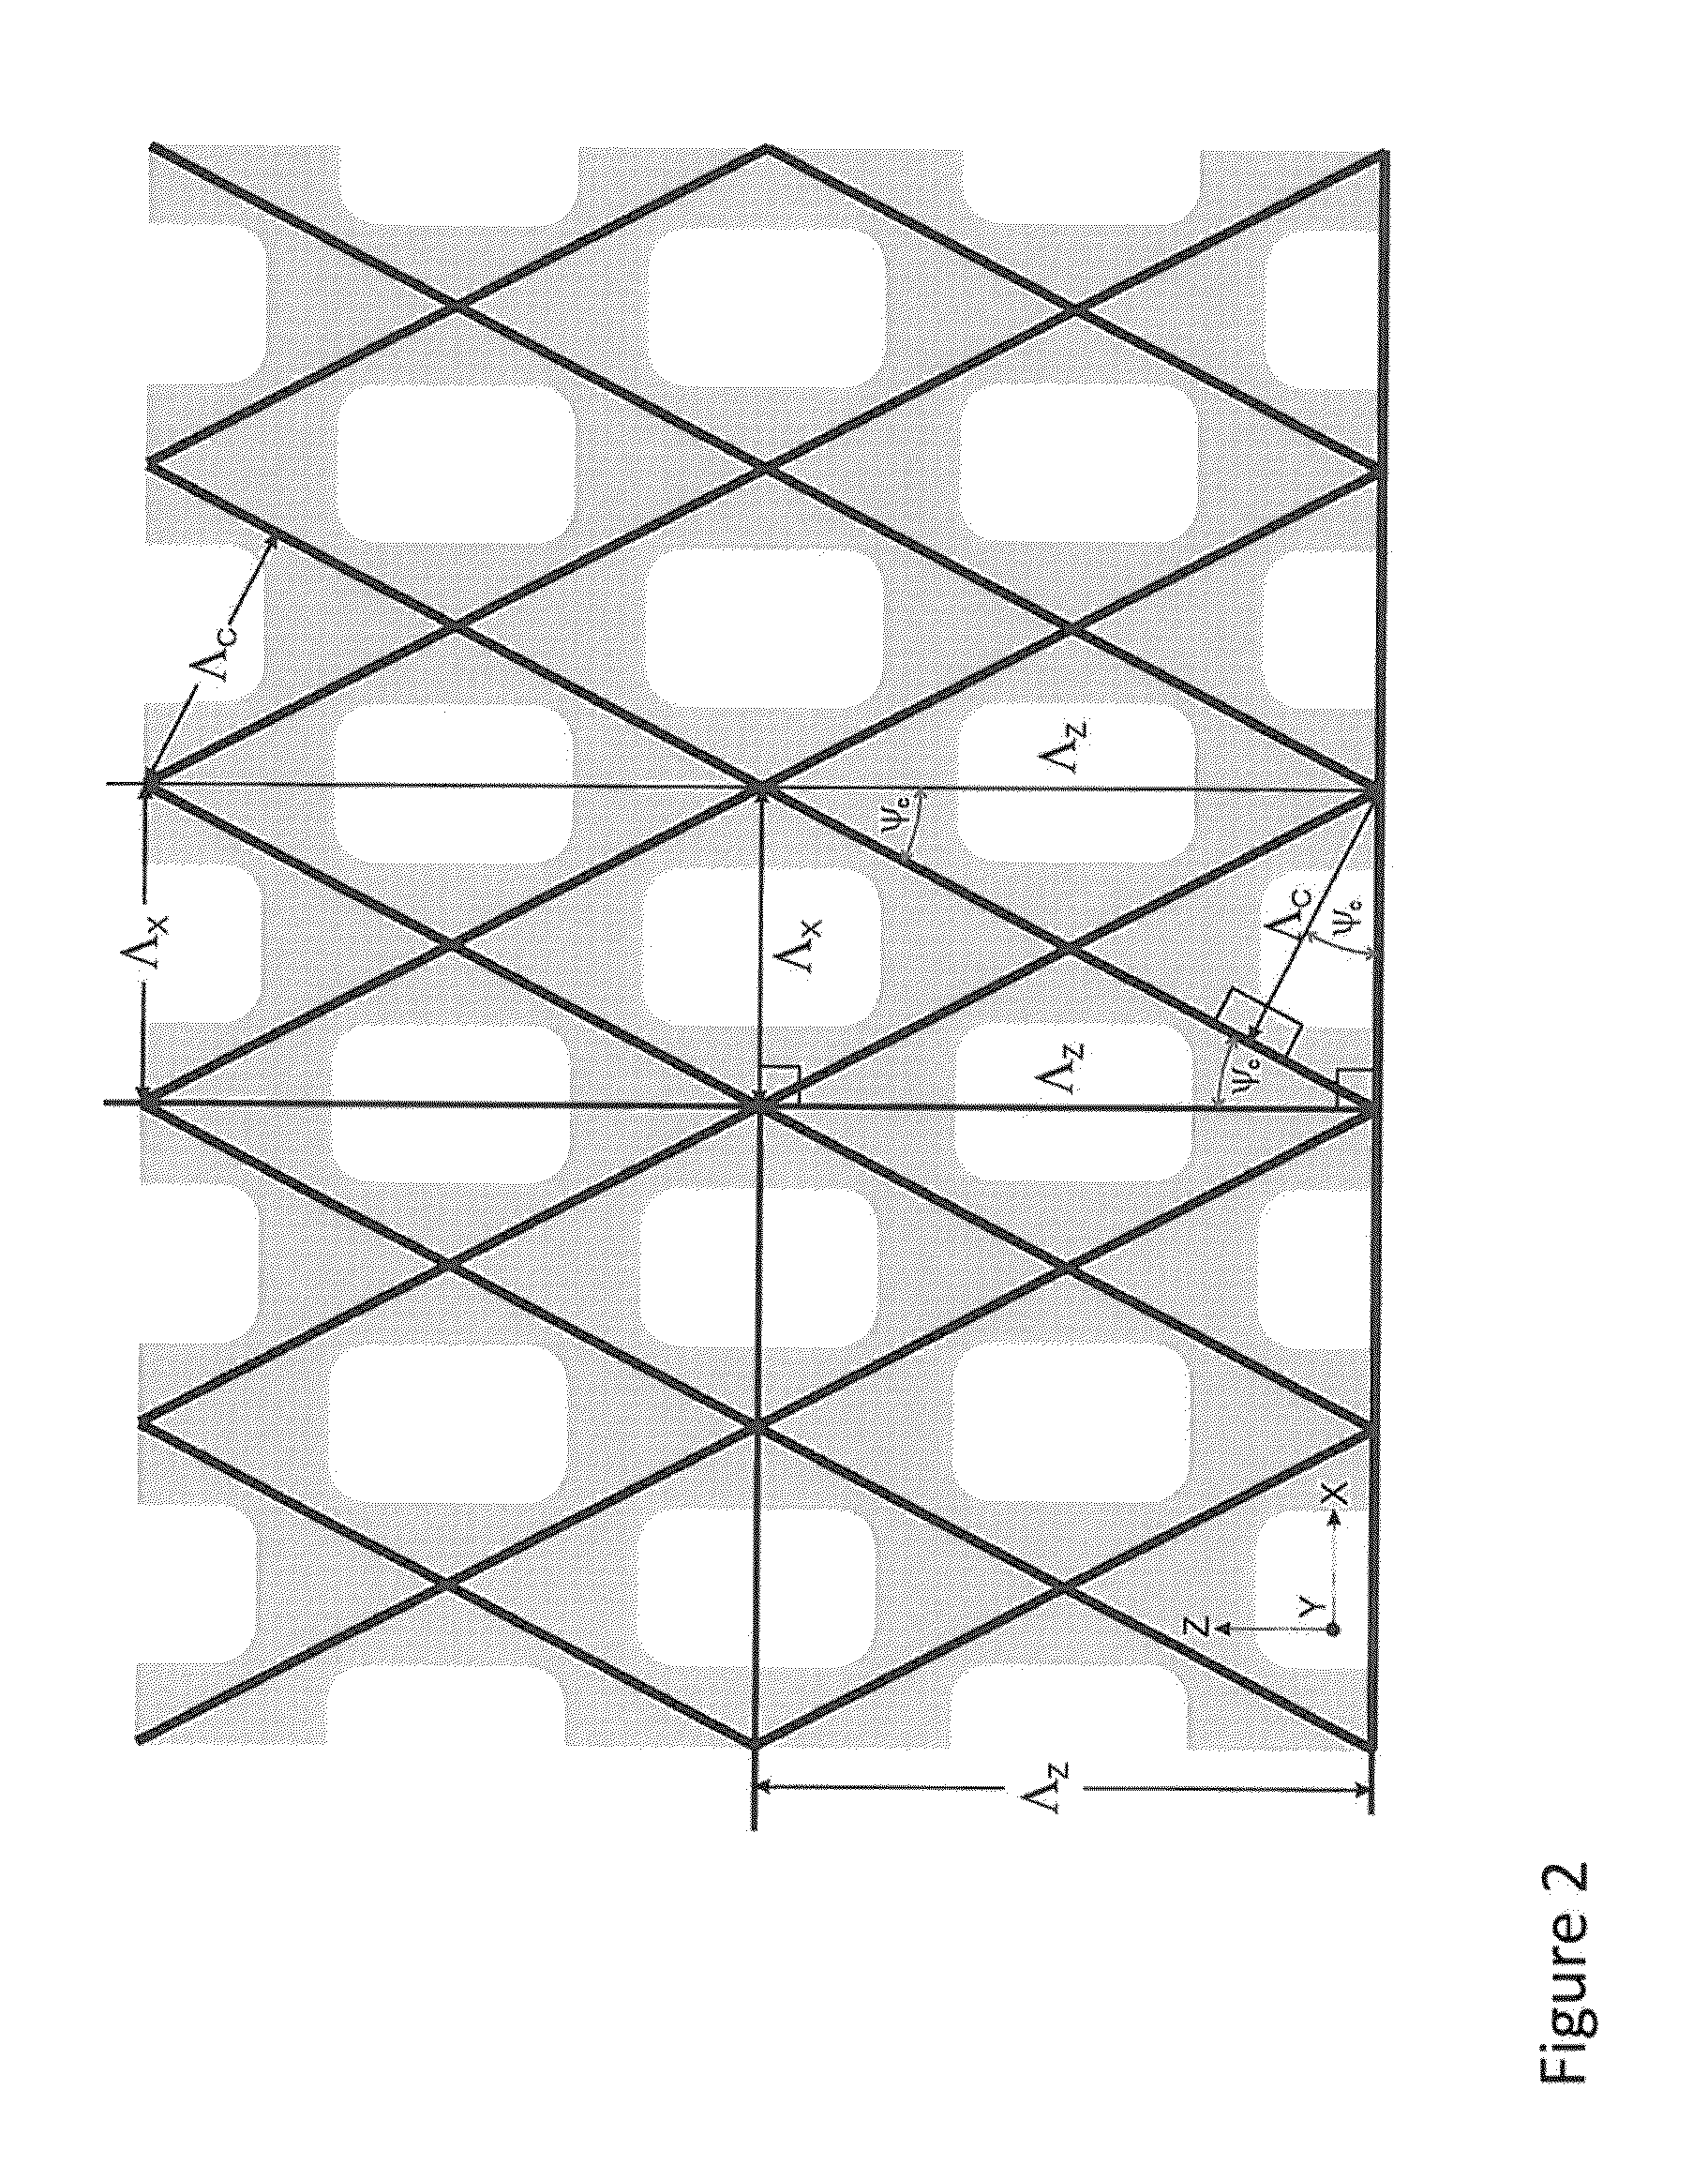 Method and apparatus for fabrication of large area 3D photonic crystals with embedded waveguides